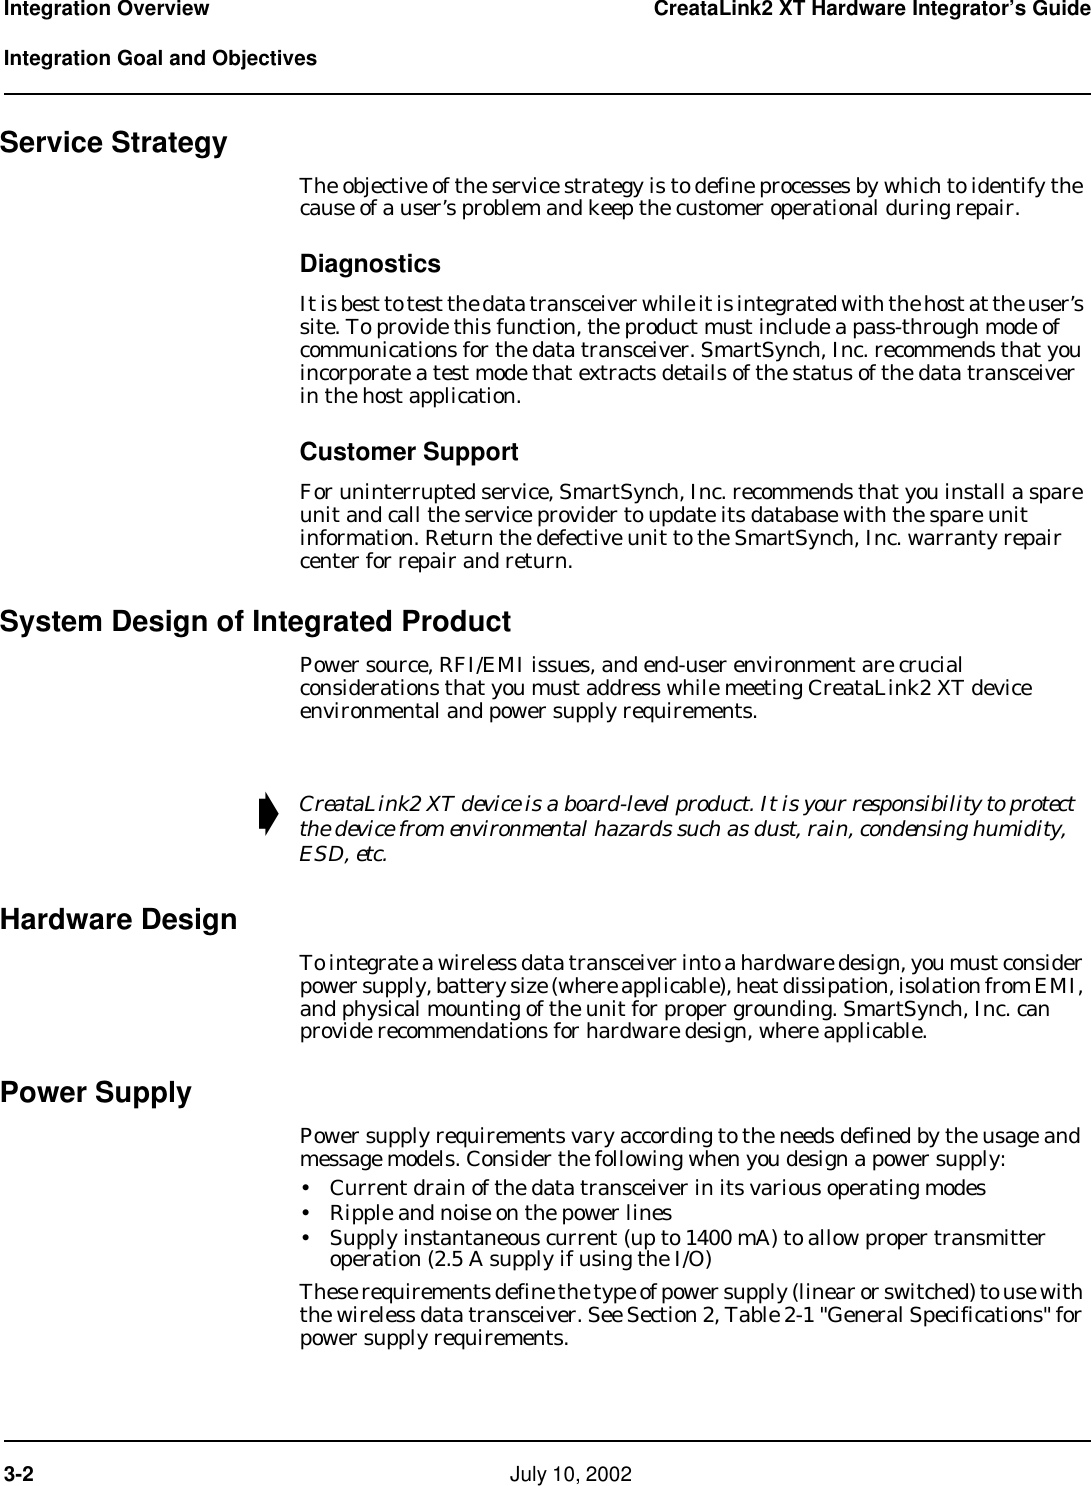 3-2    July 10, 2002 Integration Overview CreataLink2 XT Hardware Integrator’s Guide  Integration Goal and ObjectivesService StrategyThe objective of the service strategy is to define processes by which to identify the cause of a user’s problem and keep the customer operational during repair. DiagnosticsIt is best to test the data transceiver while it is integrated with the host at the user’s site. To provide this function, the product must include a pass-through mode of communications for the data transceiver. SmartSynch, Inc. recommends that you incorporate a test mode that extracts details of the status of the data transceiver in the host application.Customer SupportFor uninterrupted service, SmartSynch, Inc. recommends that you install a spare unit and call the service provider to update its database with the spare unit information. Return the defective unit to the SmartSynch, Inc. warranty repair center for repair and return.System Design of Integrated ProductPower source, RFI/EMI issues, and end-user environment are crucial considerations that you must address while meeting CreataLink2 XT device environmental and power supply requirements.Hardware DesignTo integrate a wireless data transceiver into a hardware design, you must consider power supply, battery size (where applicable), heat dissipation, isolation from EMI, and physical mounting of the unit for proper grounding. SmartSynch, Inc. can provide recommendations for hardware design, where applicable. Power SupplyPower supply requirements vary according to the needs defined by the usage and message models. Consider the following when you design a power supply:• Current drain of the data transceiver in its various operating modes• Ripple and noise on the power lines • Supply instantaneous current (up to 1400 mA) to allow proper transmitter operation (2.5 A supply if using the I/O)These requirements define the type of power supply (linear or switched) to use with the wireless data transceiver. See Section 2, Table 2-1 &quot;General Specifications&quot; for power supply requirements.➧CreataLink2 XT device is a board-level product. It is your responsibility to protect the device from environmental hazards such as dust, rain, condensing humidity, ESD, etc.